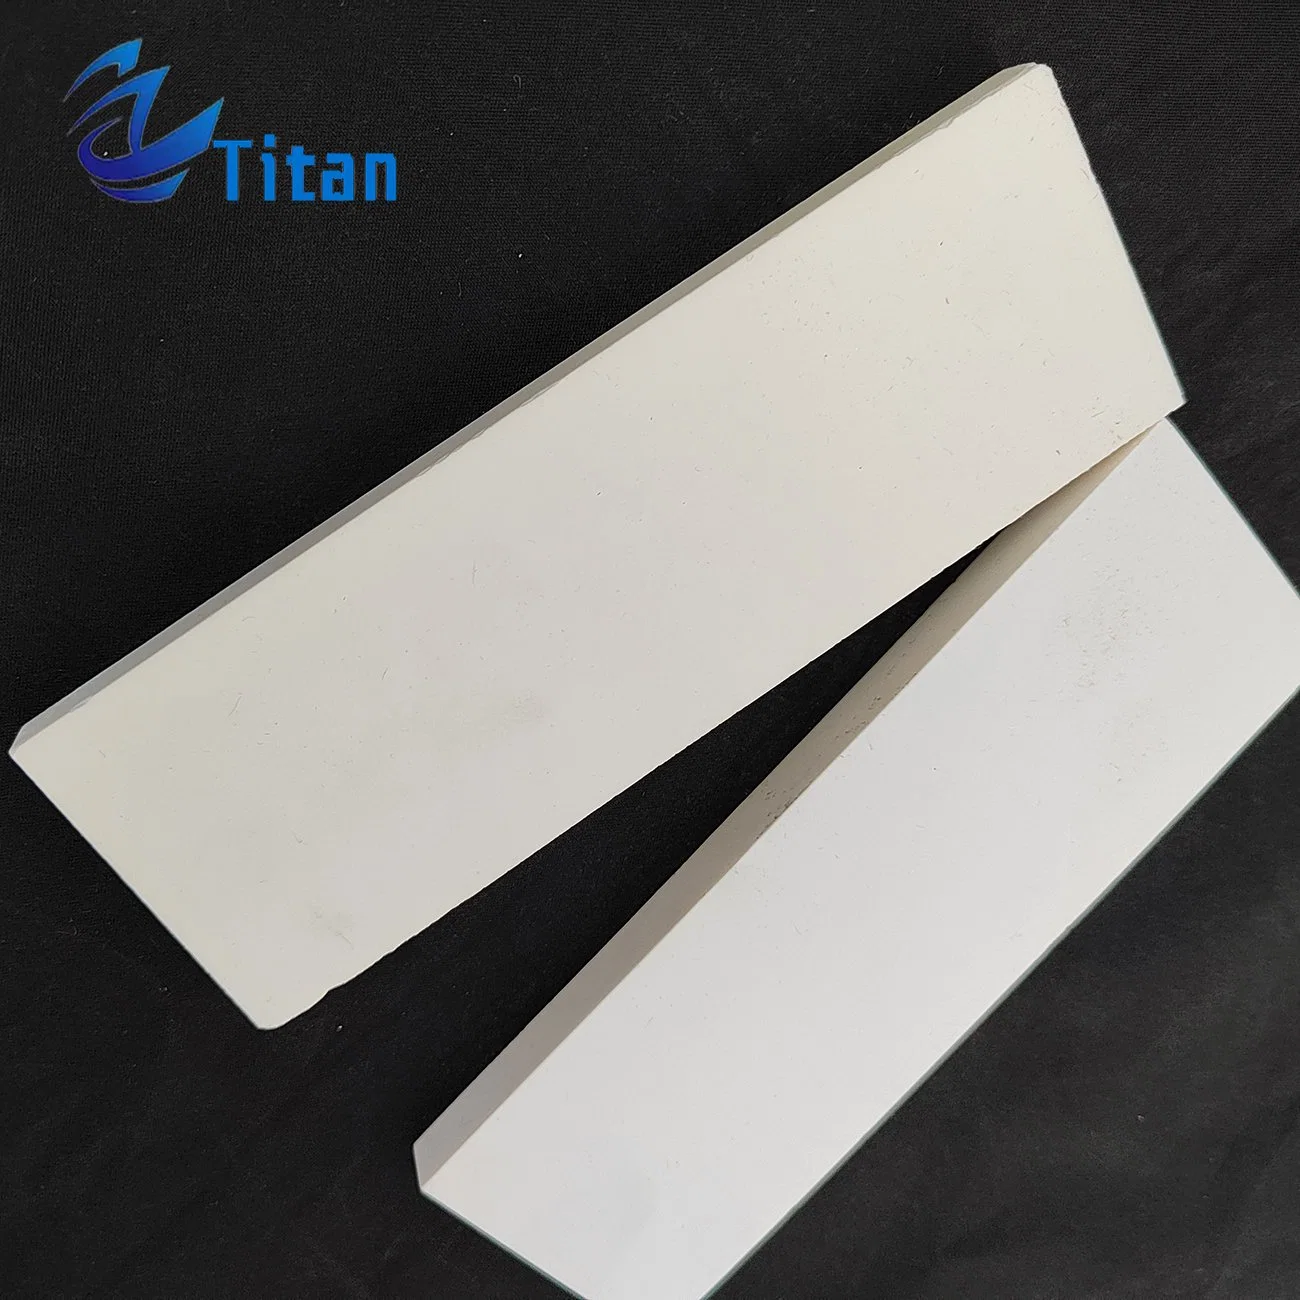 Corrosion and Chemical Resistance Wear Abrasion Resistant 92/92/Zta High Alumina Ceramic Tile Liner